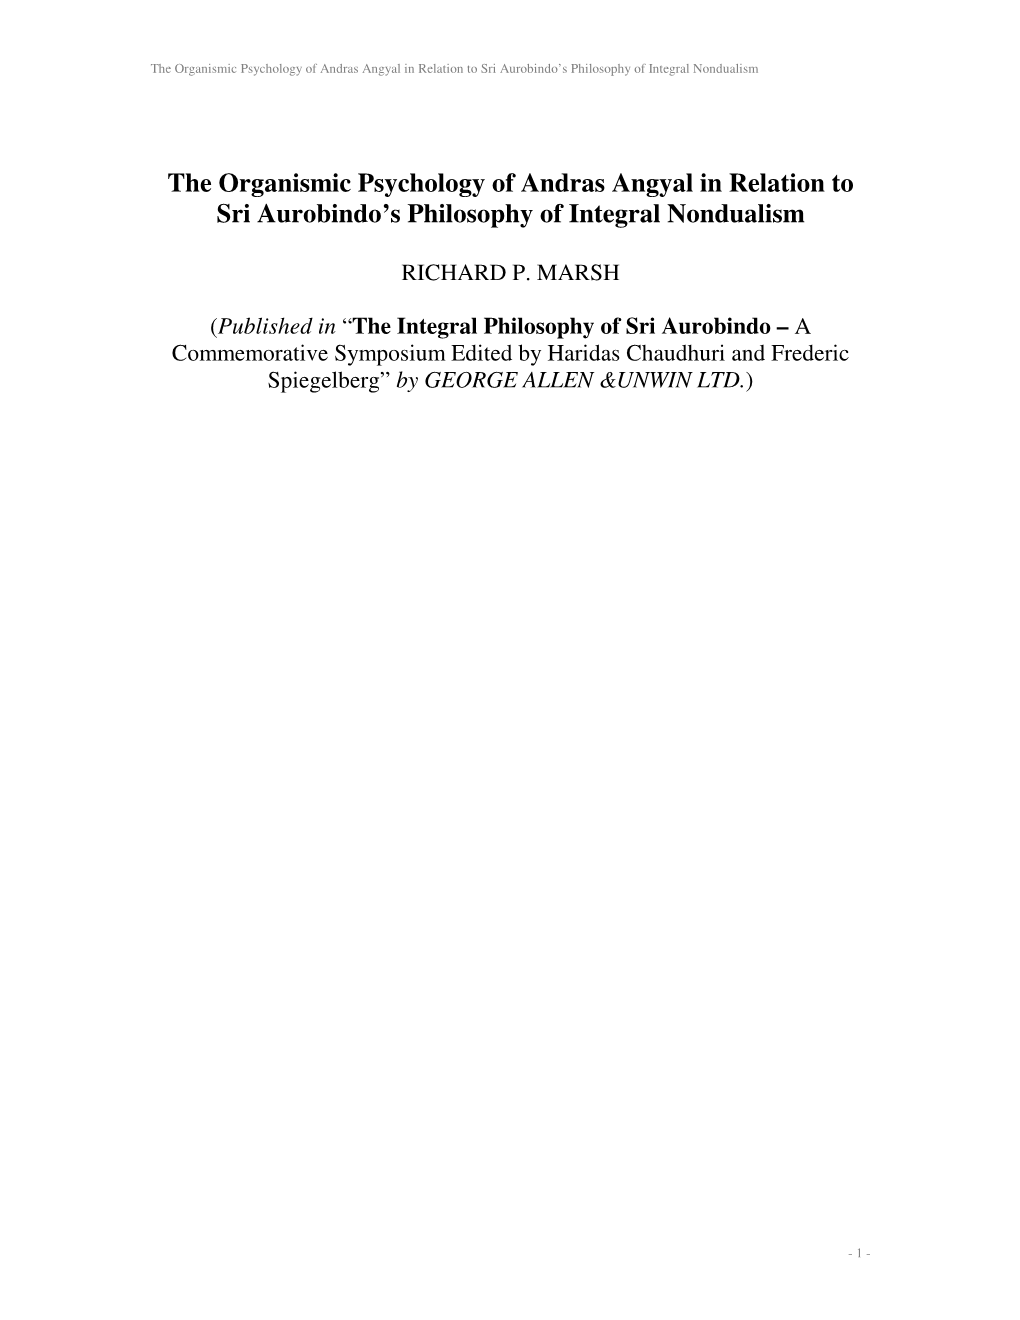 The Organismic Psychology of Andras Angyal in Relation to Sri Aurobindo’S Philosophy of Integral Nondualism